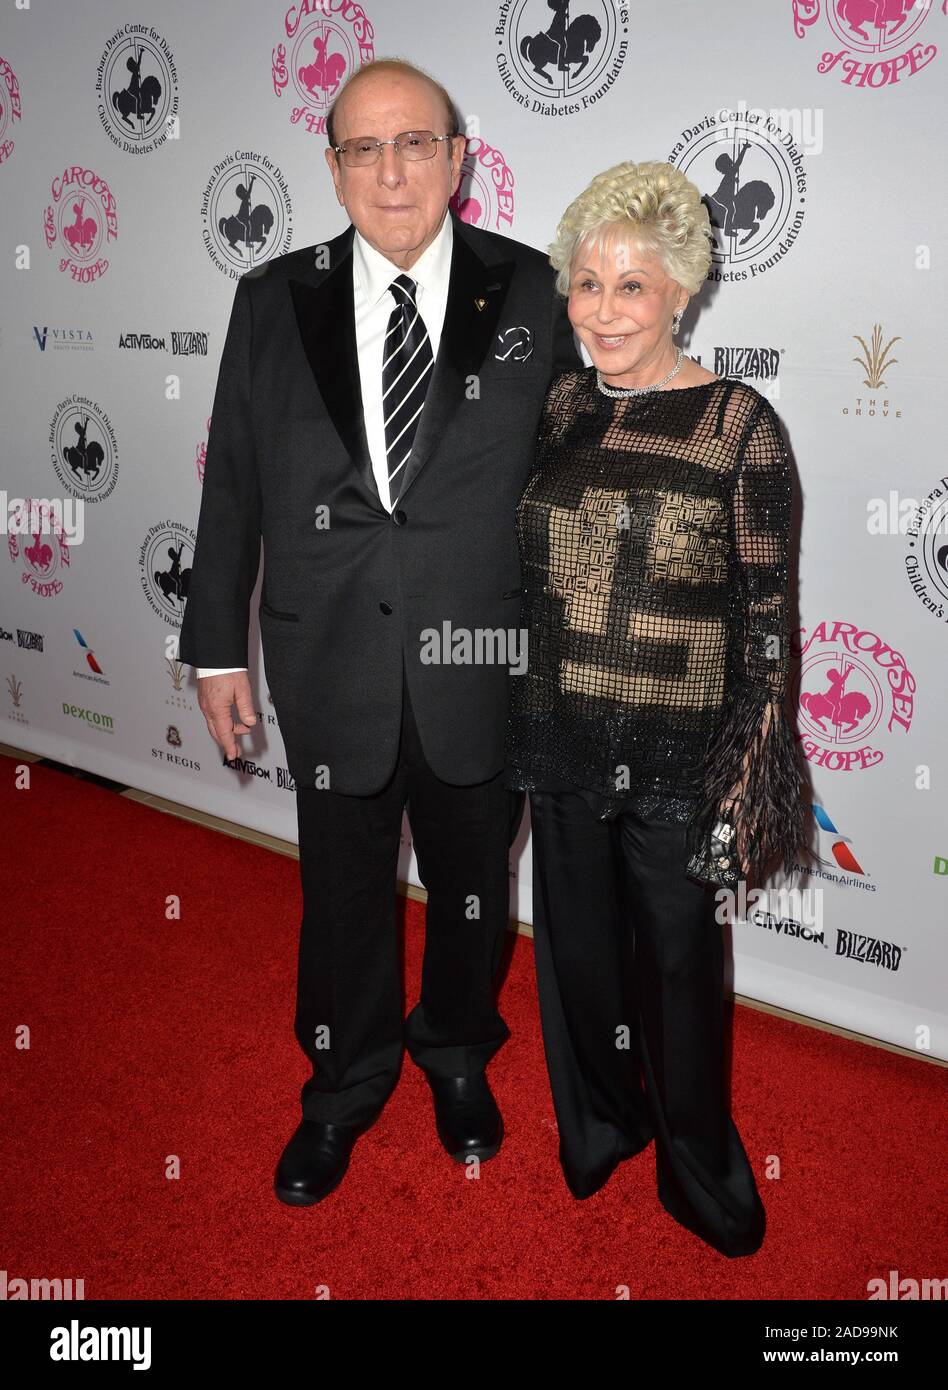 BEVERLY HILLS, CA. October 8, 2016: Clive Davis & Wife at the 2016 Carousel of Hope Ball at the Beverly Hilton Hotel. © 2016 Paul Smith / Featureflash Stock Photo